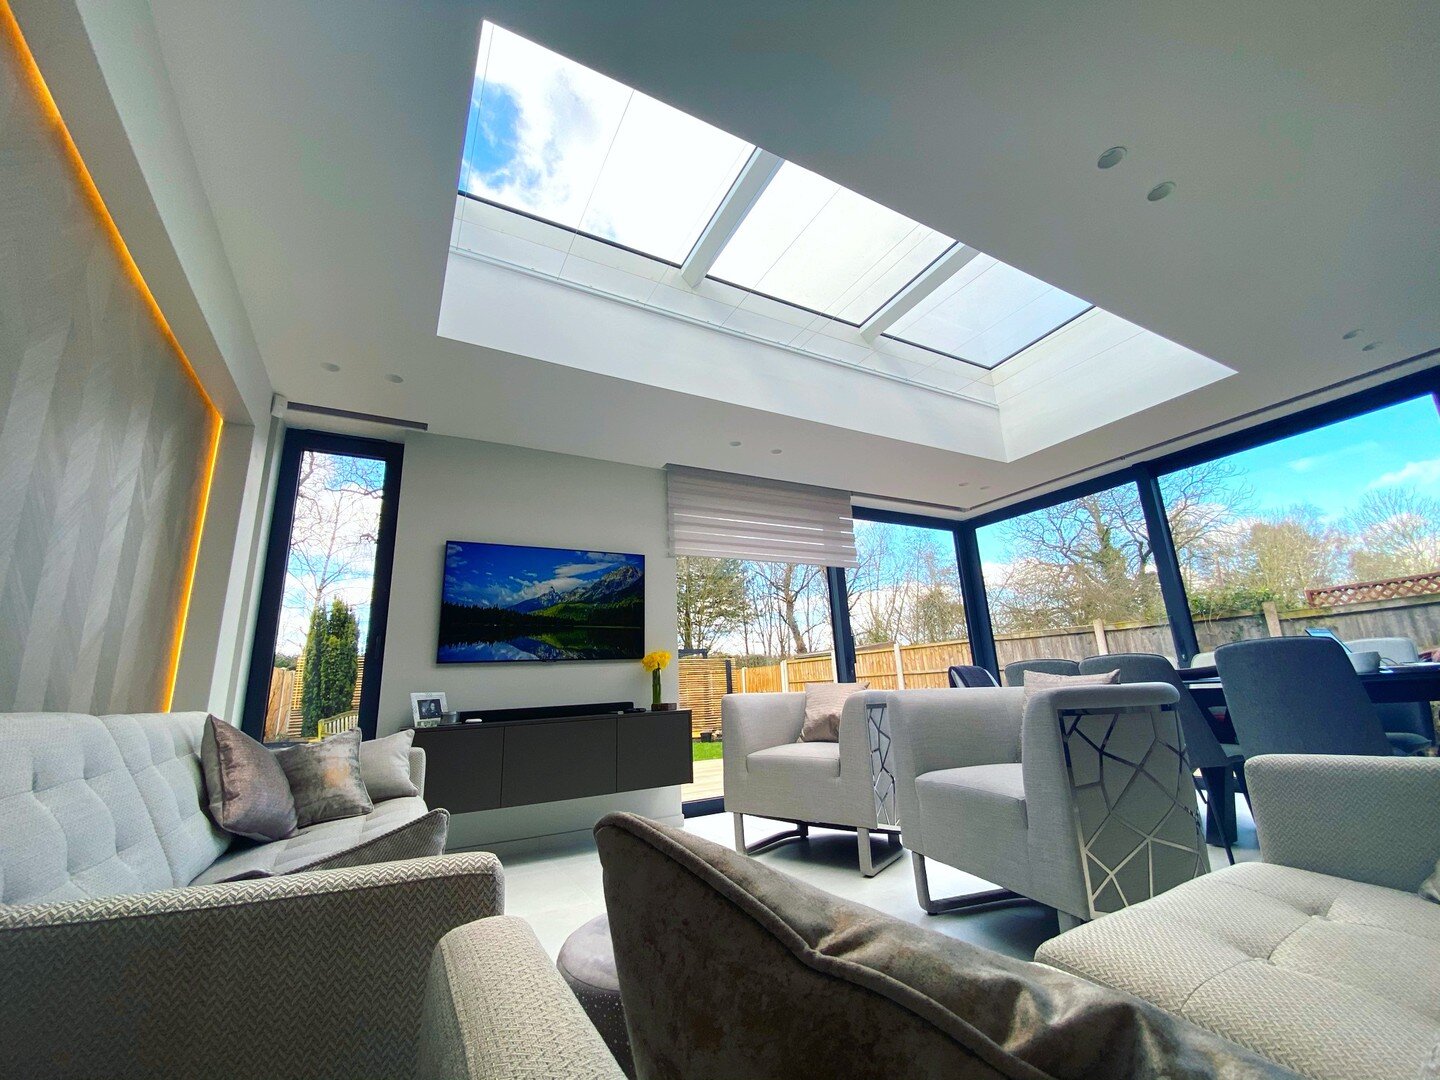 It might be cold outside but the sun is shining. If you're looking for an open plan space that allows natural light to come in, we can help you! ☀

#architecture #architecturedesign #interior #interiordesign #interiorstyle #house #lifestyle #property